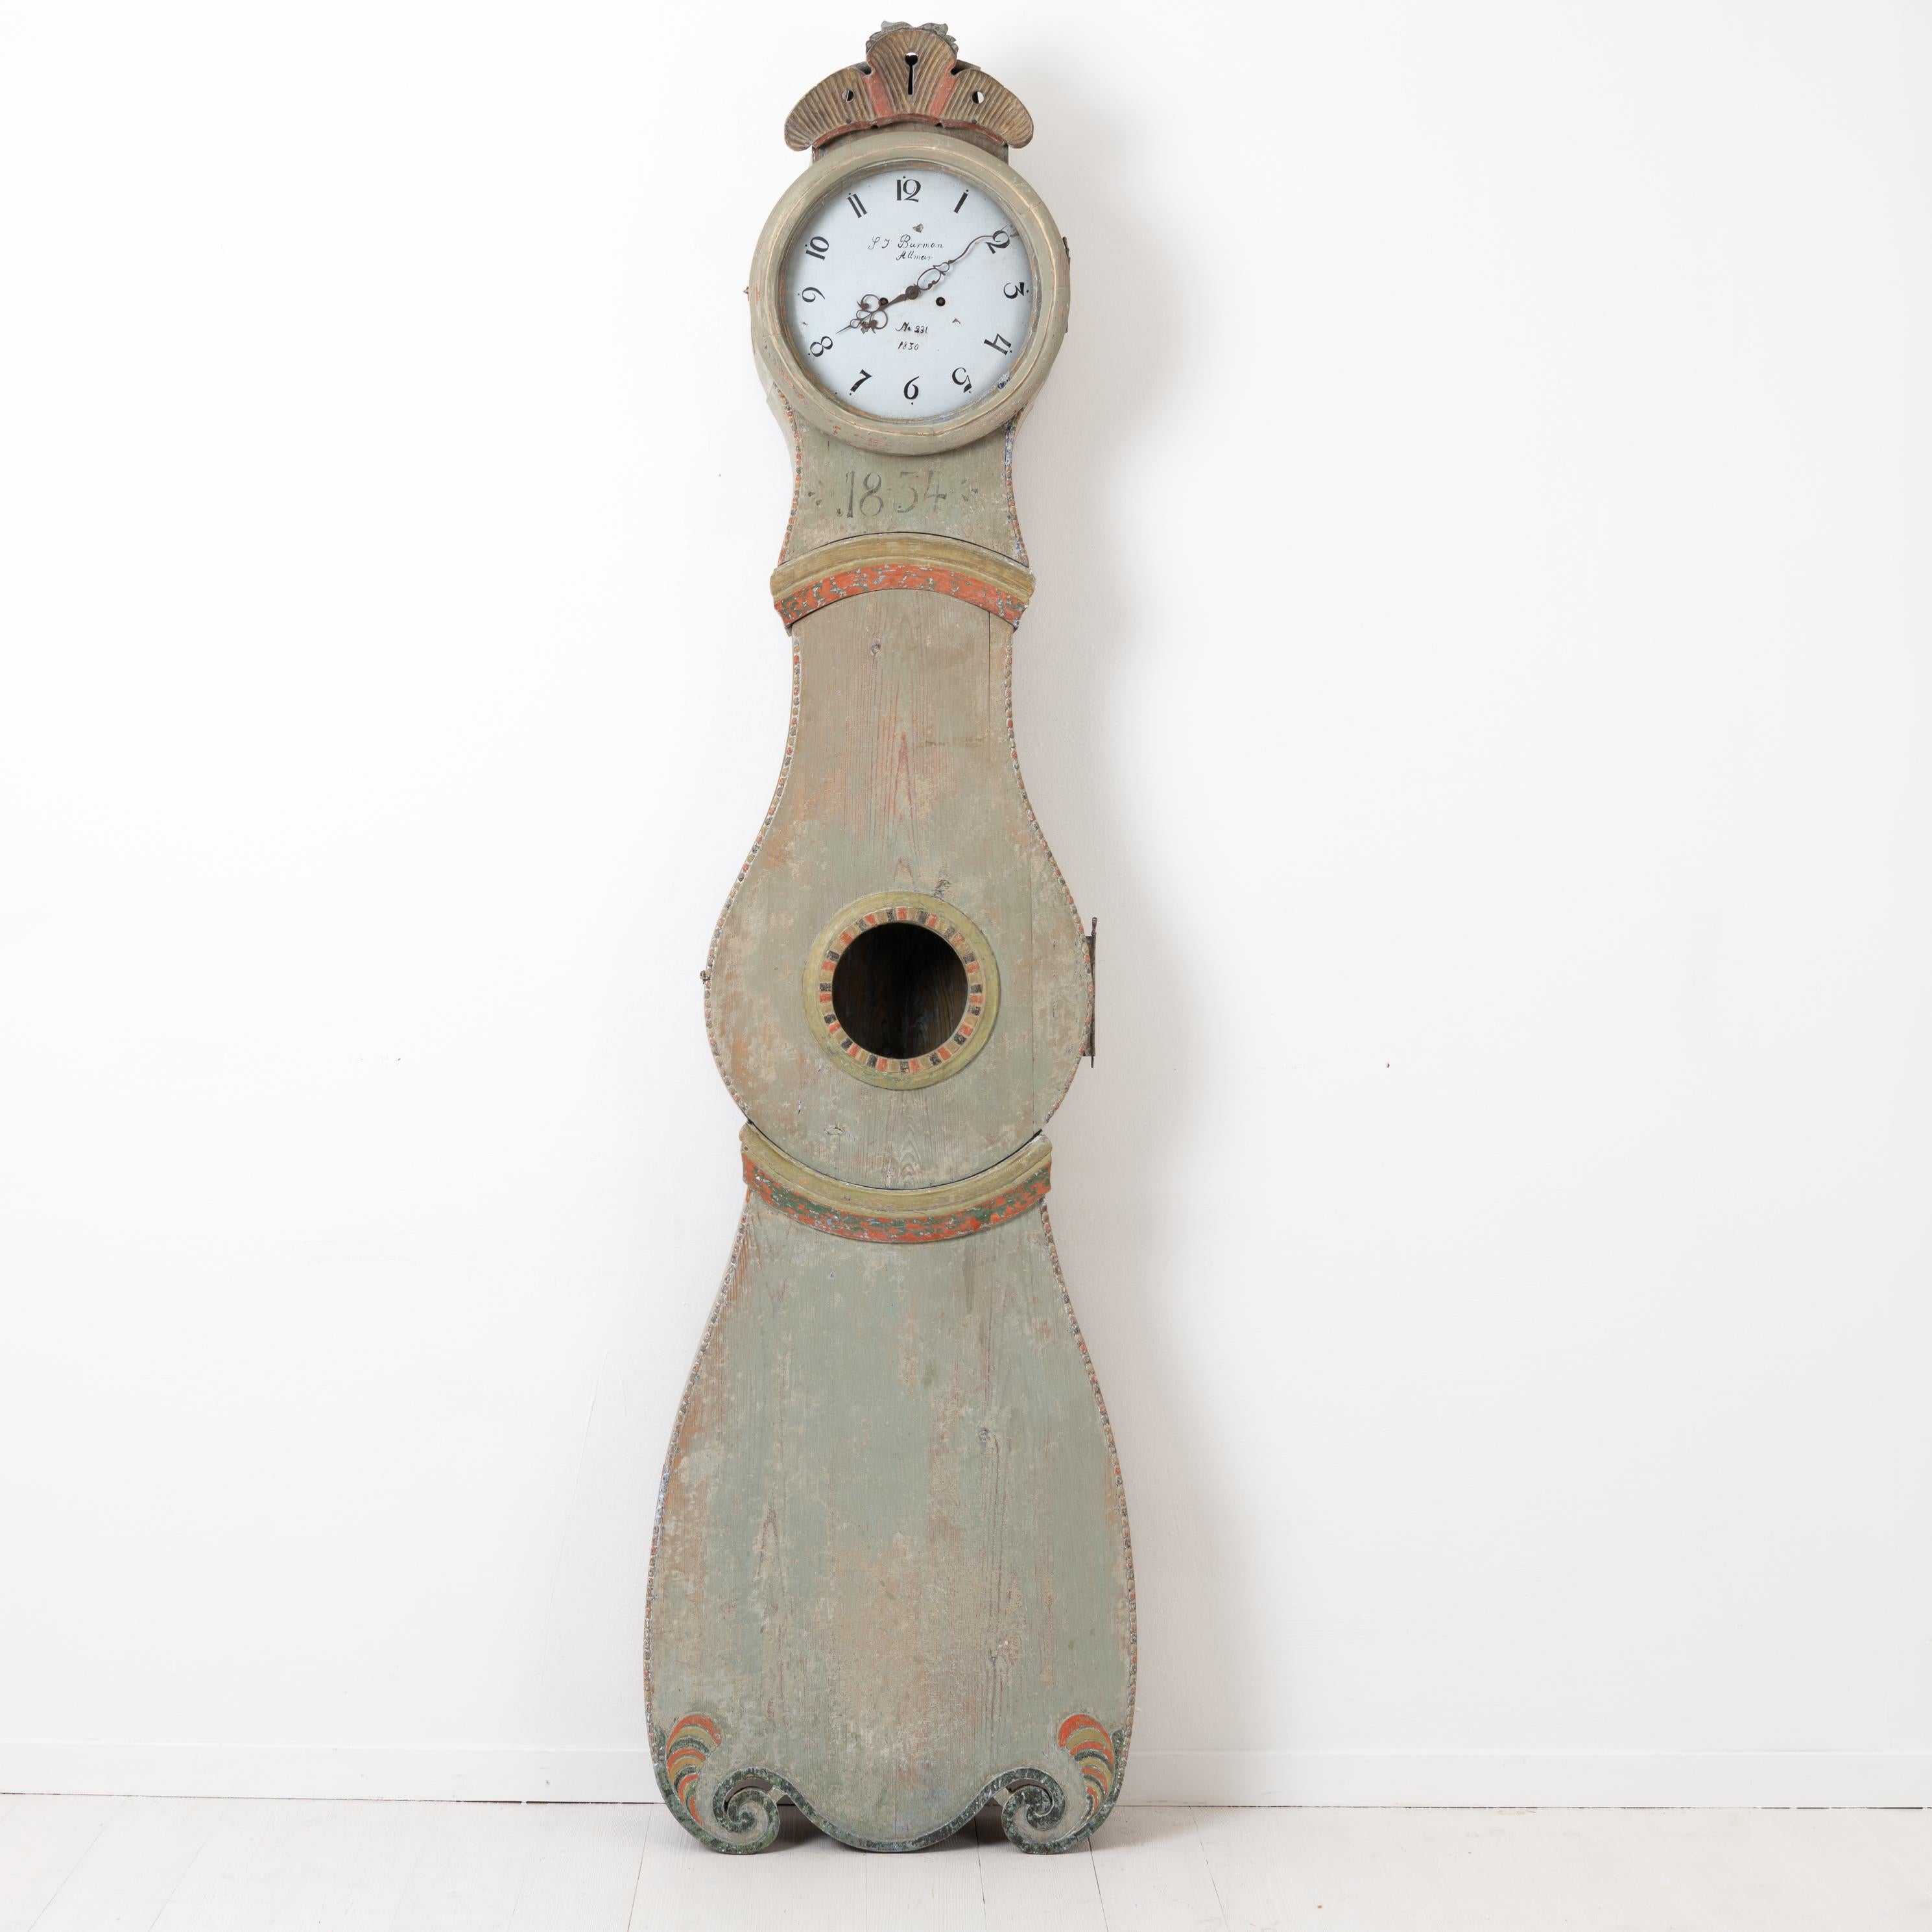 Swedish long case clock made during the early 1800s in Rococo. Made in northern Sweden and dated 1834 with a green toned clock face. The clock is scraped to the original first layer of paint of which the color is a pale green. Healthy and solid